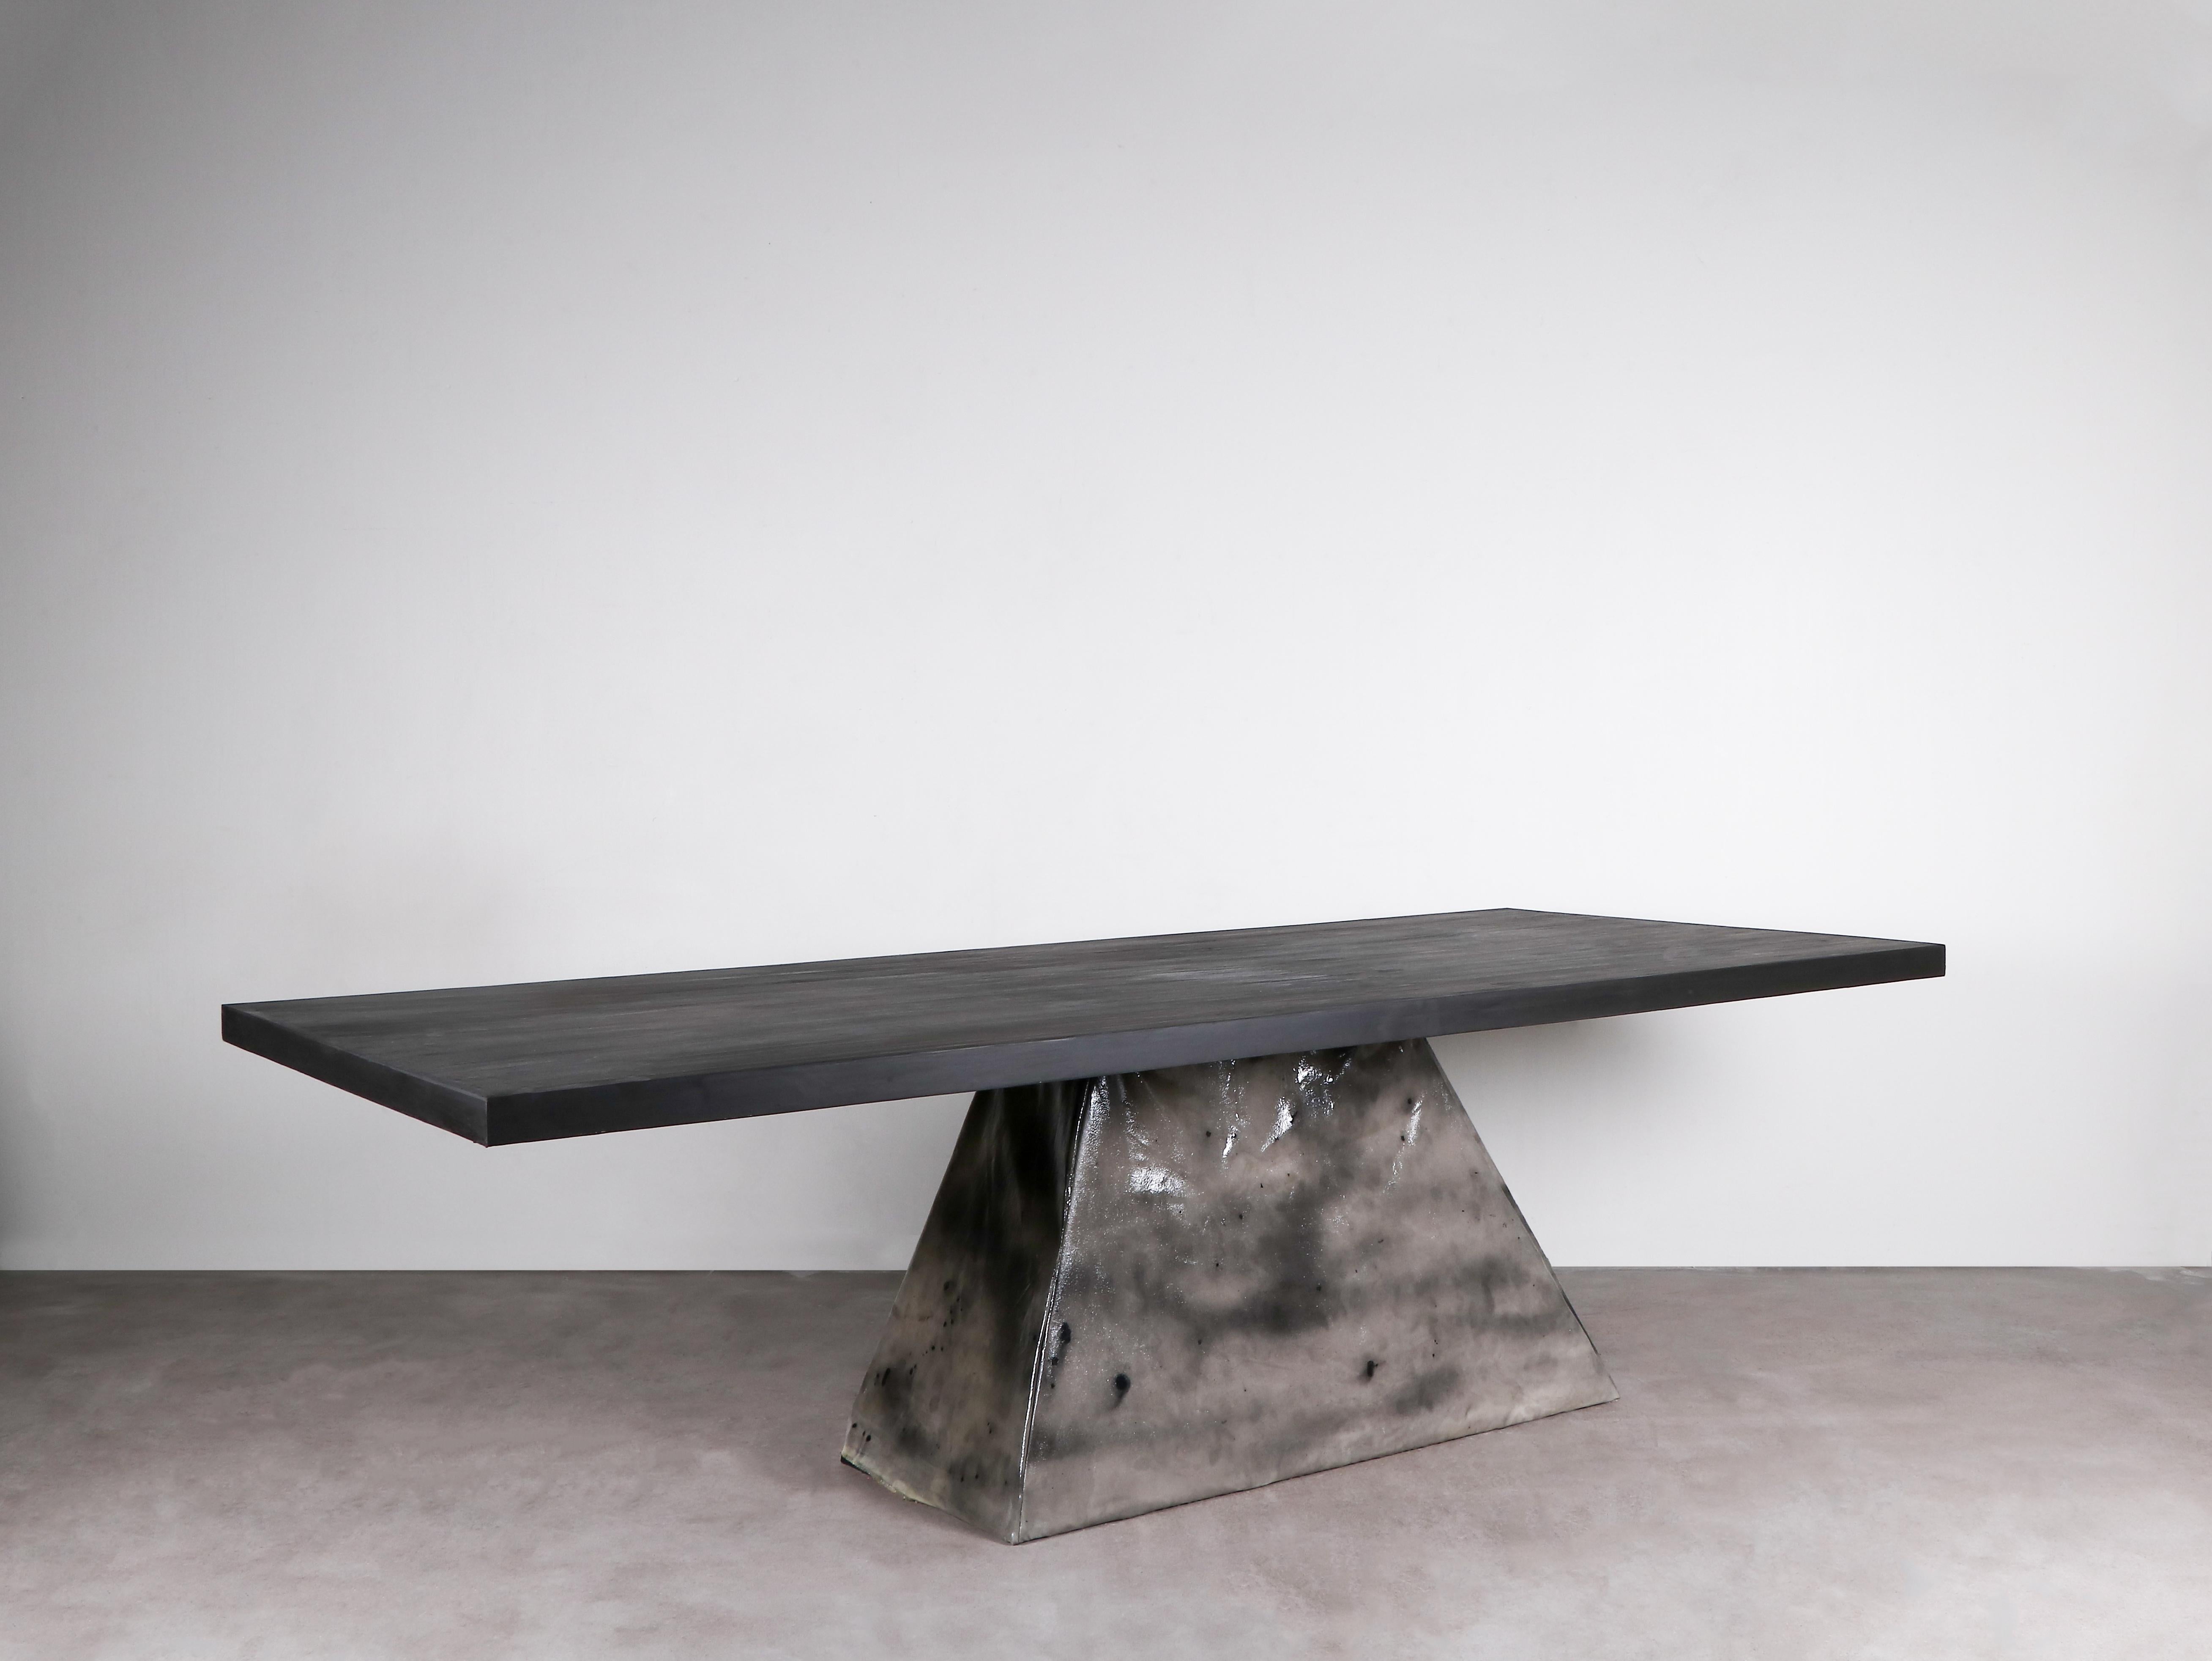 Contemporary black dining table in hand-waxed plywood - Duk table by Lucas Morten

2021
Limited edition of 11 + 1 AP
Dimensions (cm): L 240 D 100 H 72
Material: Reinforced canvas on plywood and Handwaxed plywood

Objects comes with a